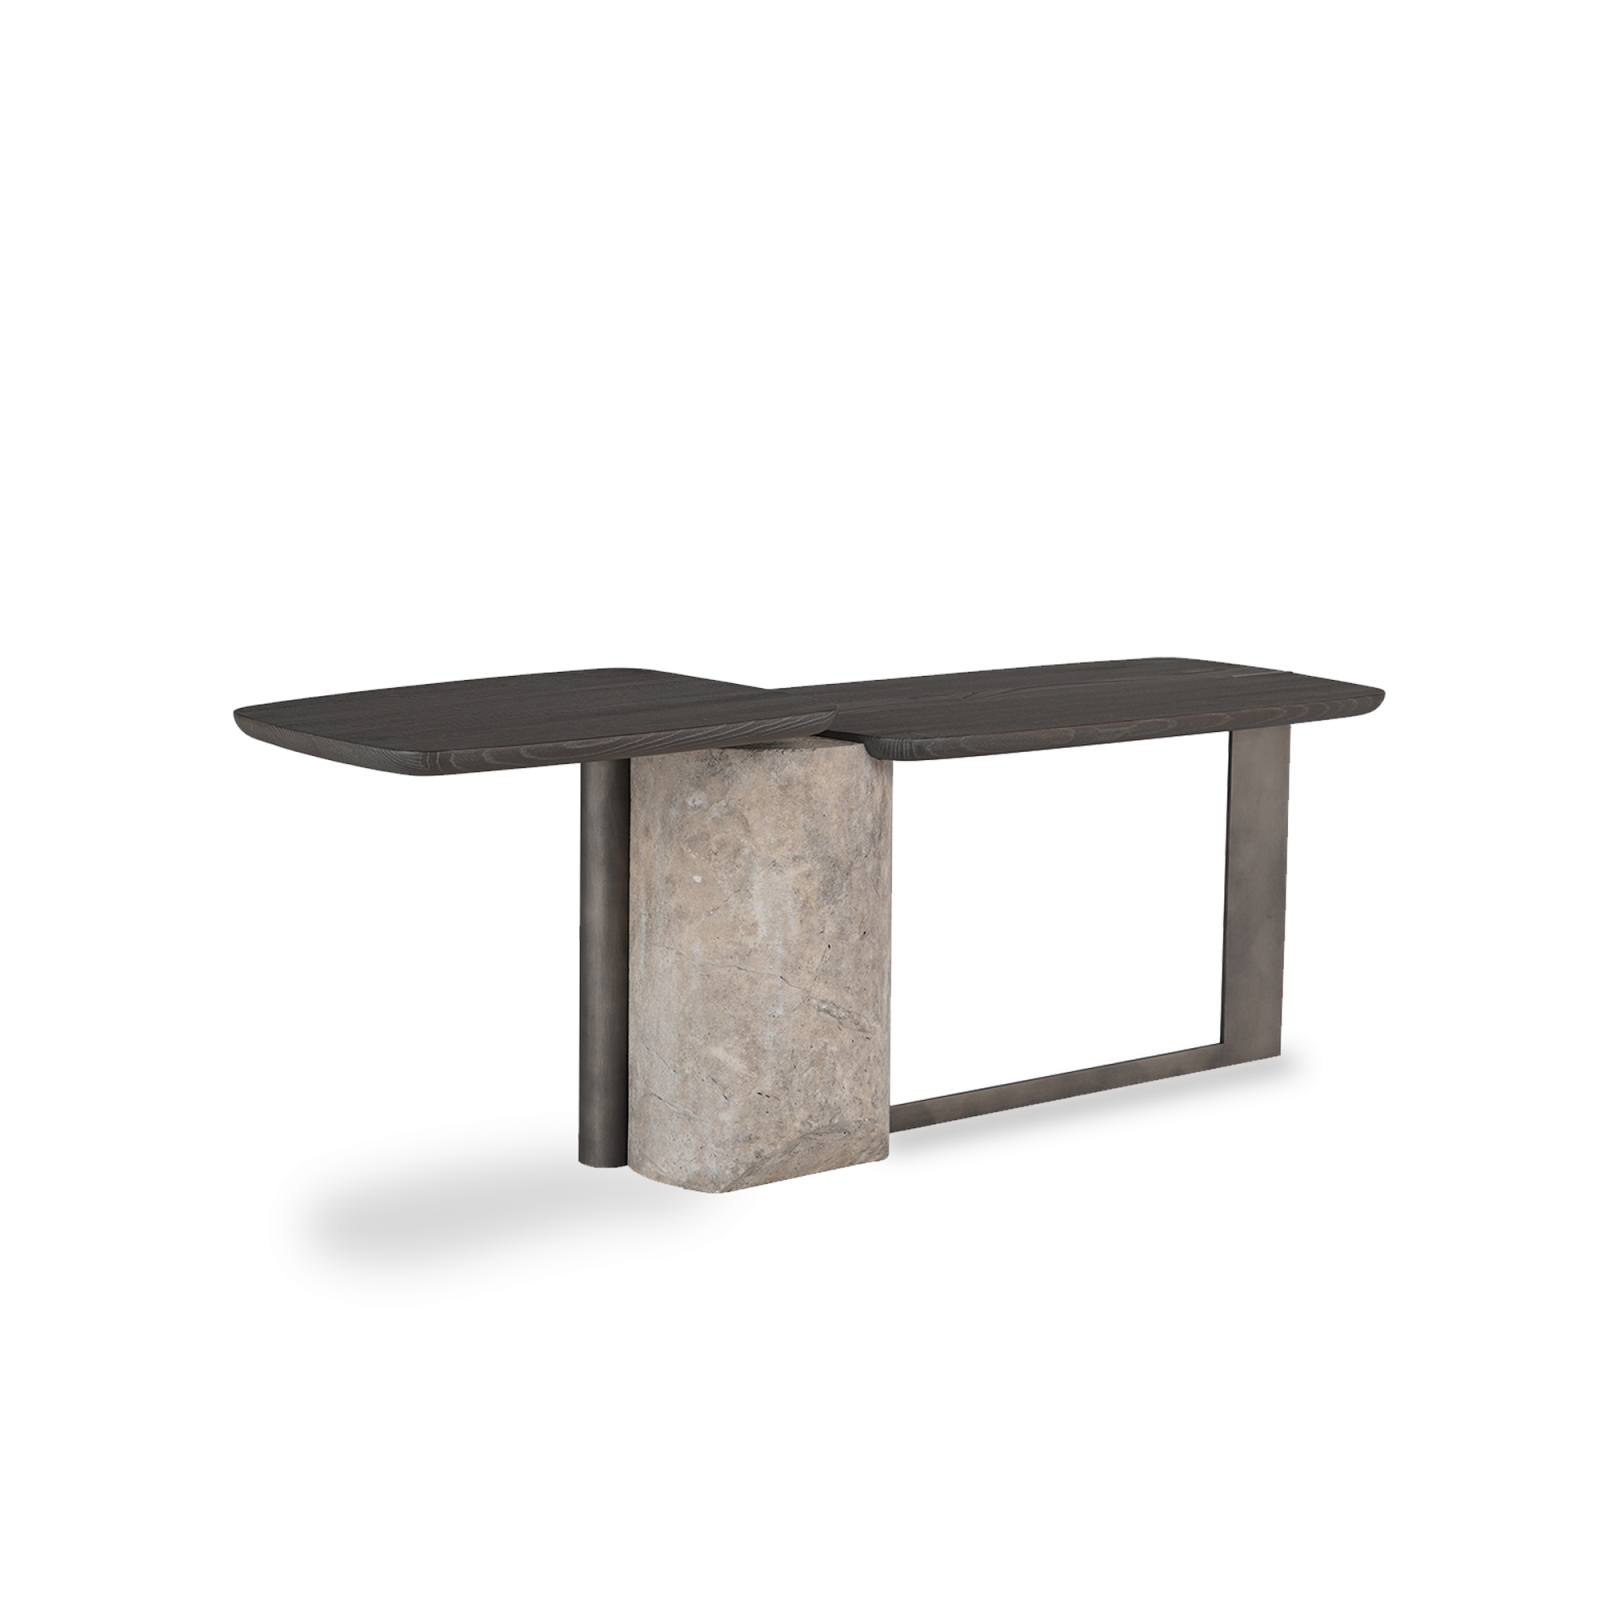 titano side table combines marble touch with solid wood with contemporary lines.